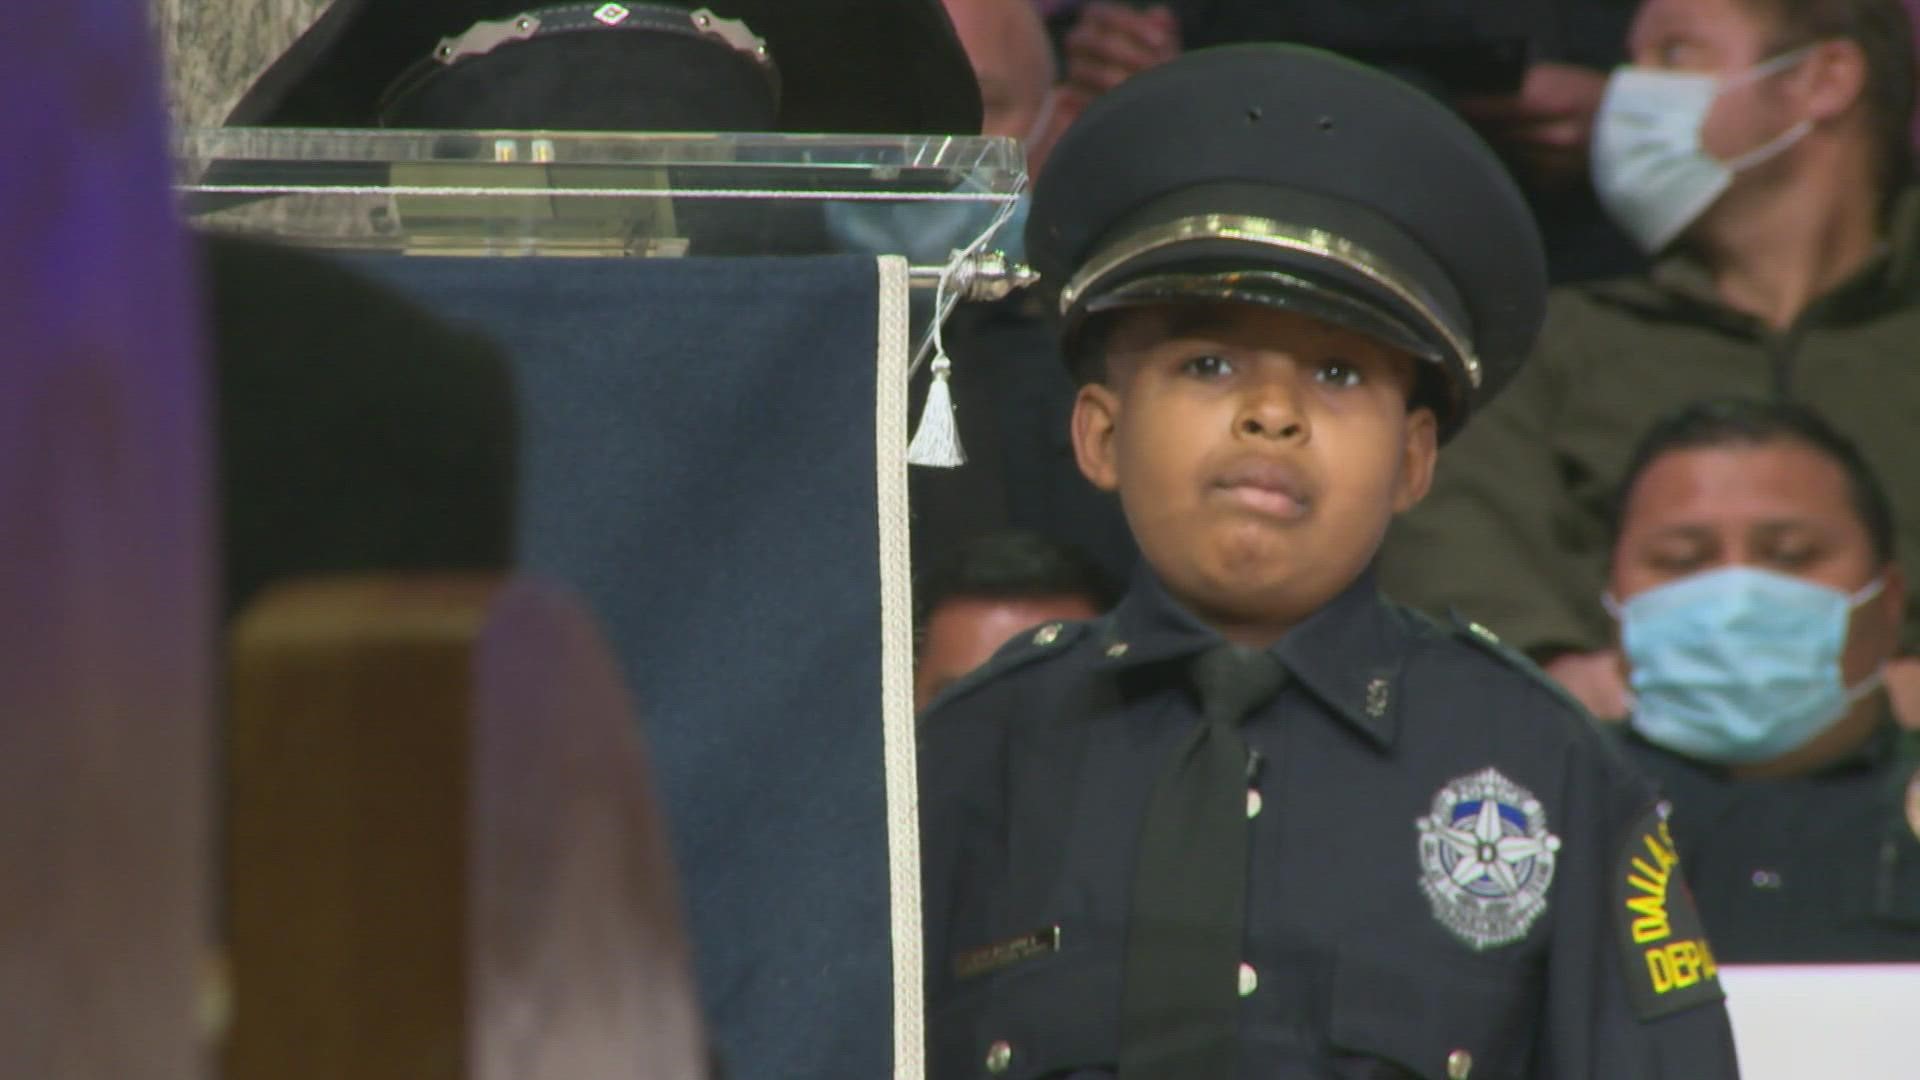 More than 30 law enforcement agencies showed up for the ceremony.